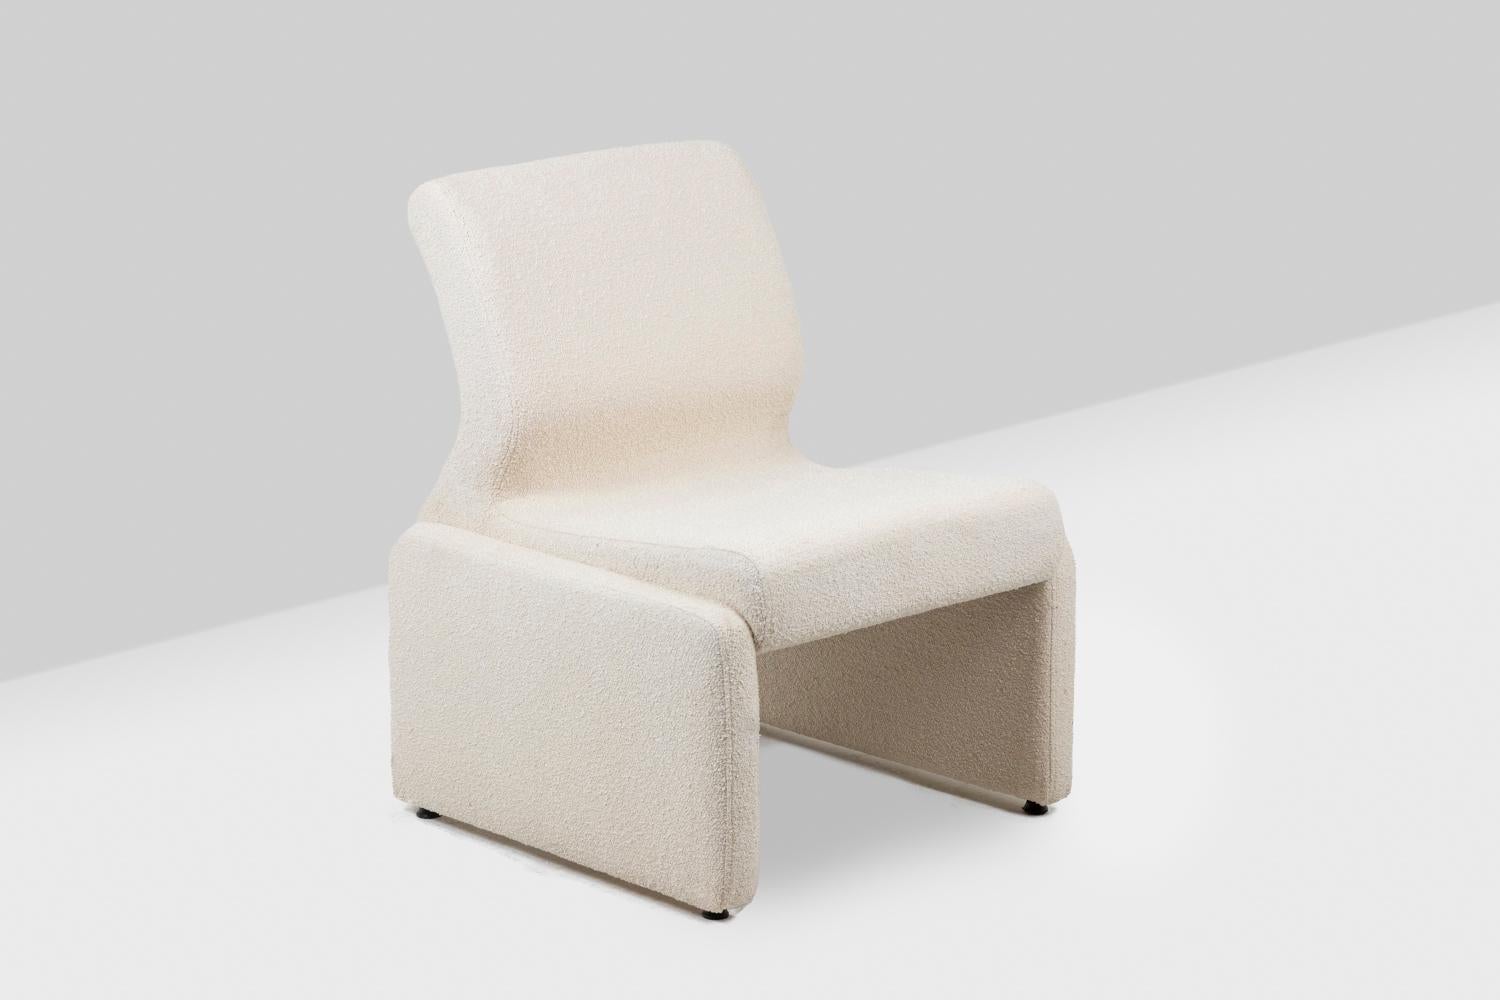 Pair of low chairs with loops, rectangular in shape and white in color. Curved backrest.

Work realized in the 1970s.